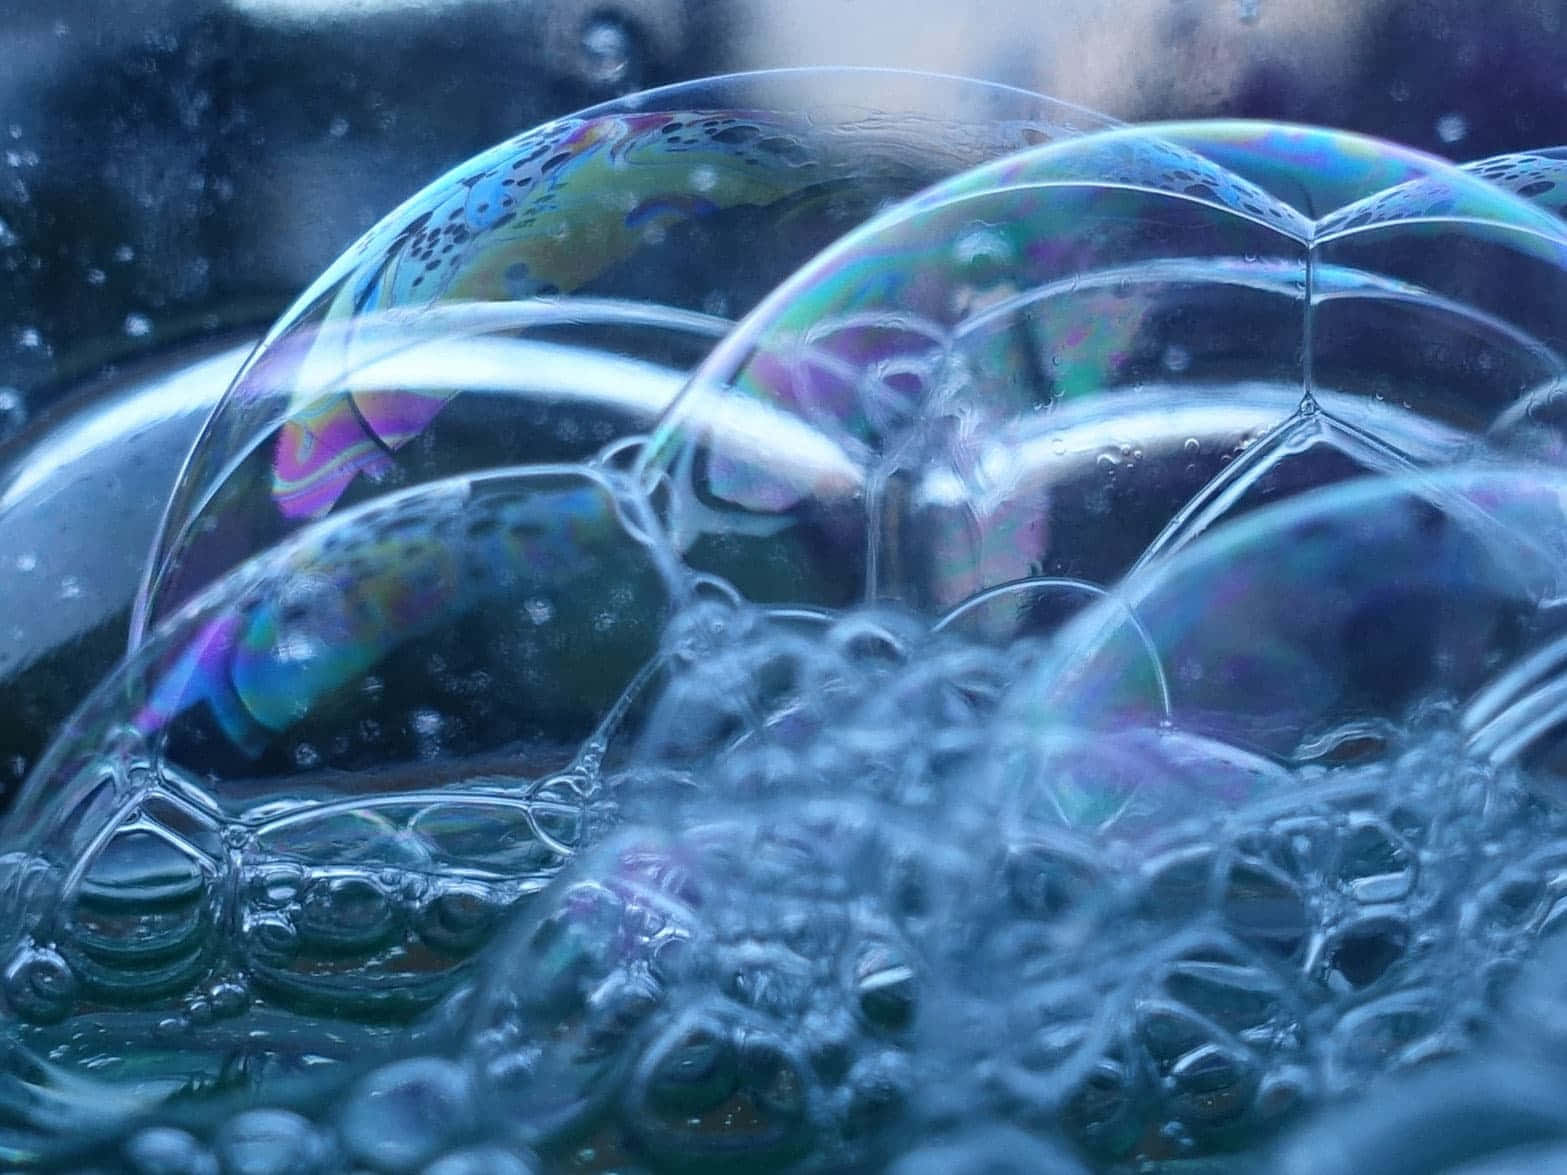 Bubbles In Water By Samantha Mcdonald